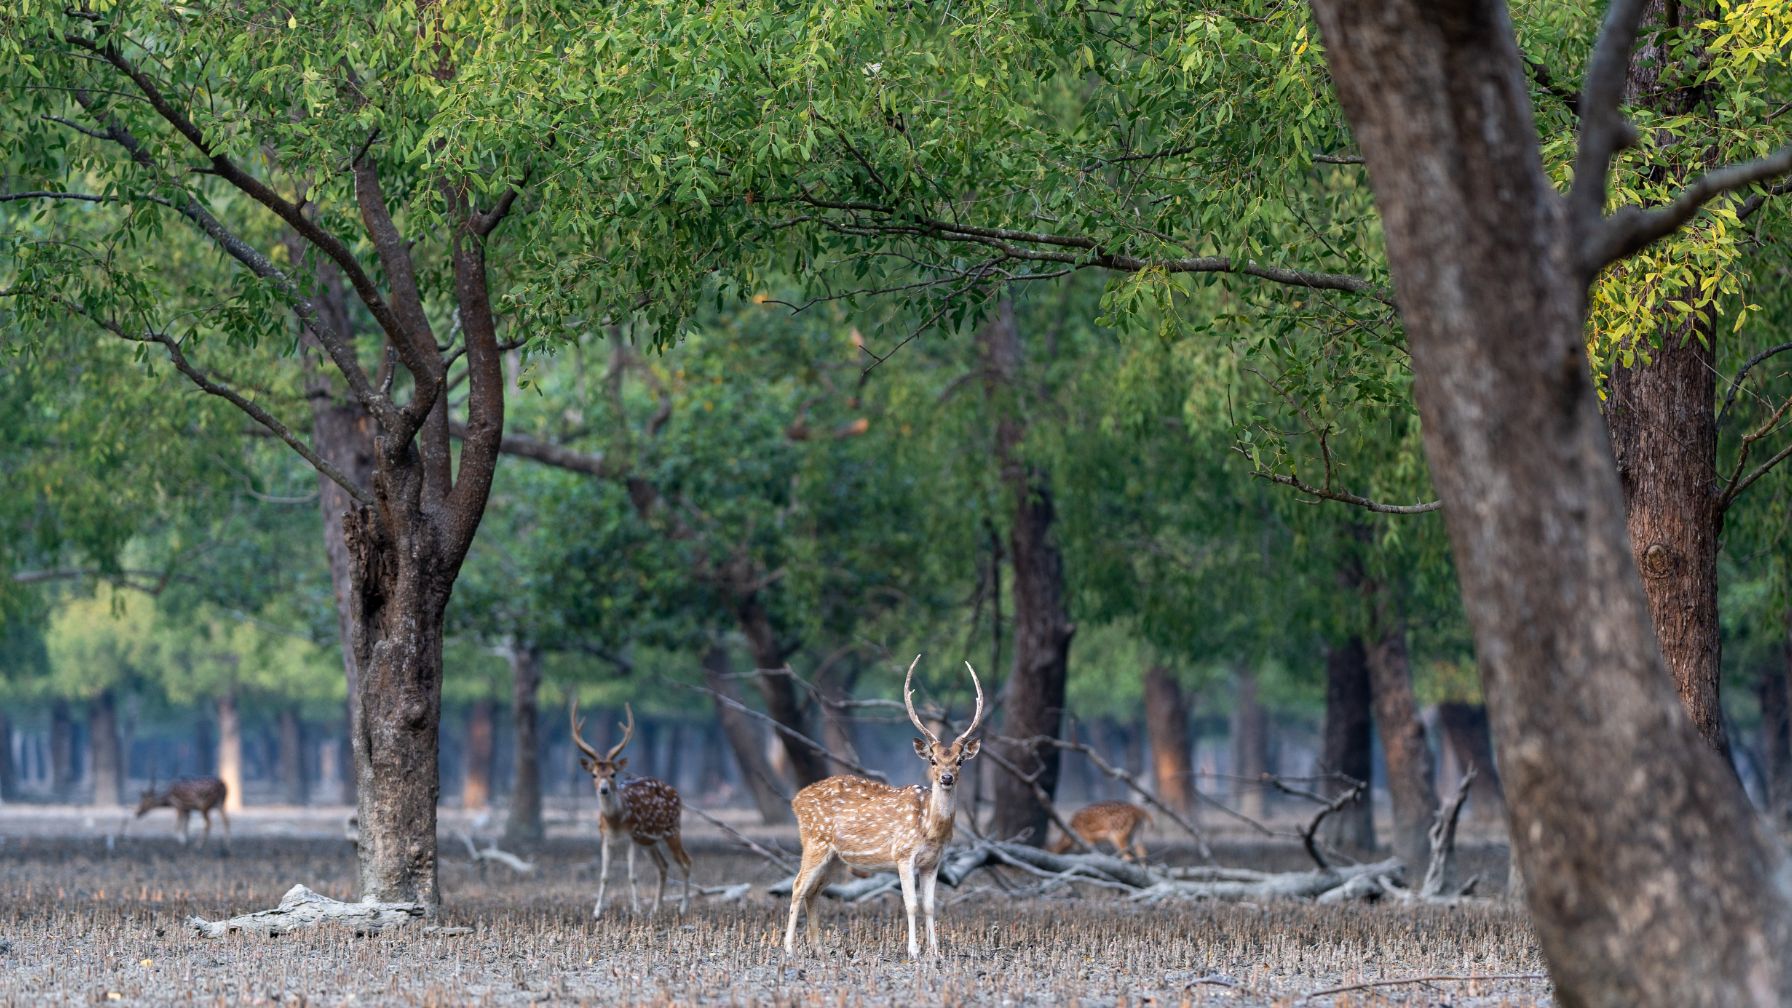 Spotted chital deer are easier to spot grazing – a wonderful moment during a boat tour in the Sundarbans. The akzente article ‘My neighbour, the Sundarbans World Heritage Site’ looks at how humans and animals coexist in this remote and special corner of the world. © Tapash Paul/GIZ